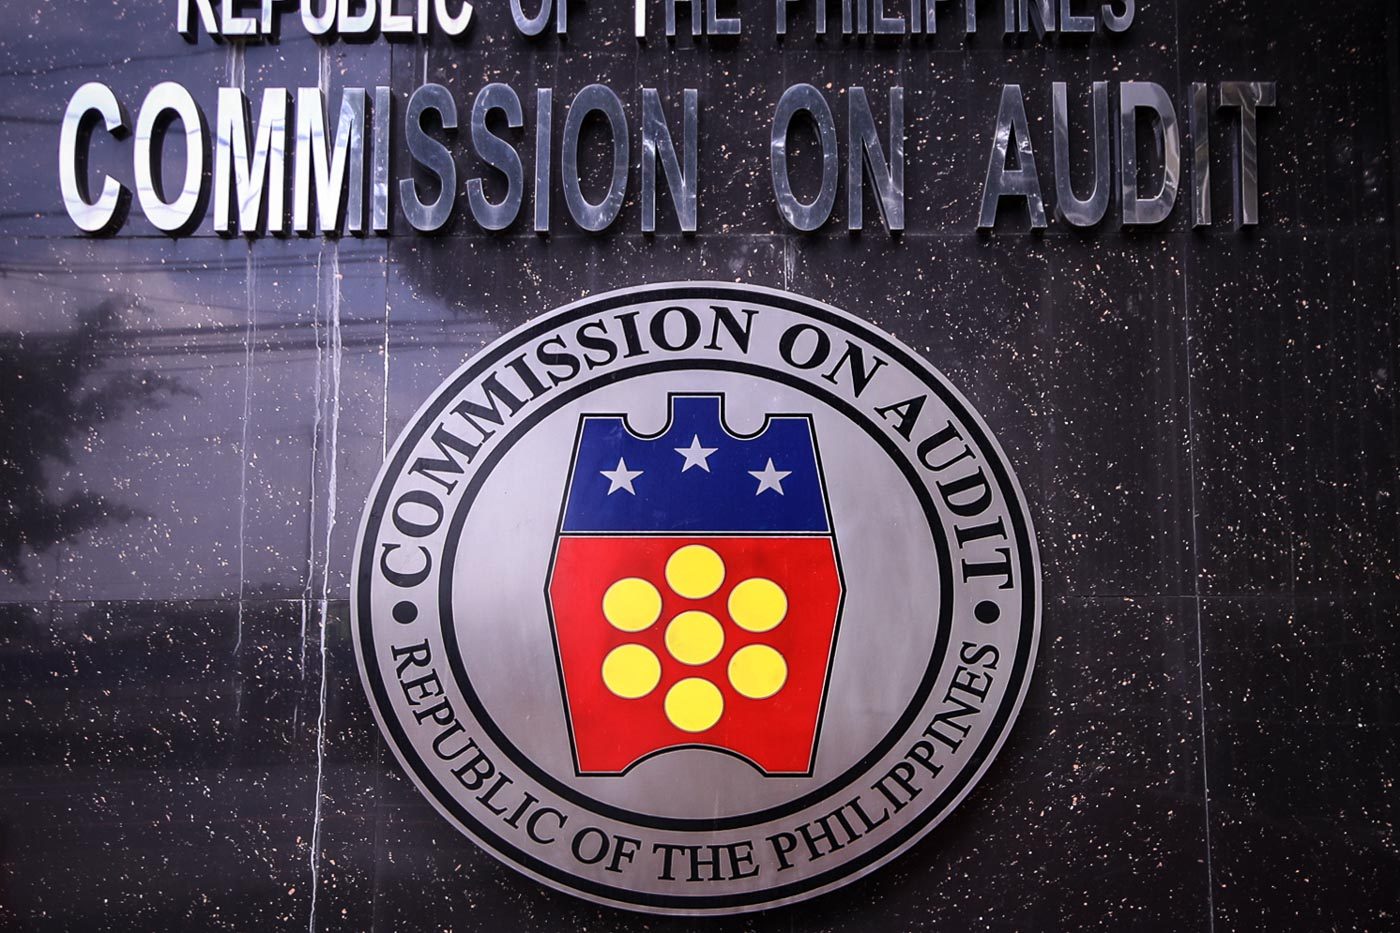 COA upholds disallowance of Catanduanes intel funds in 2012, 2013